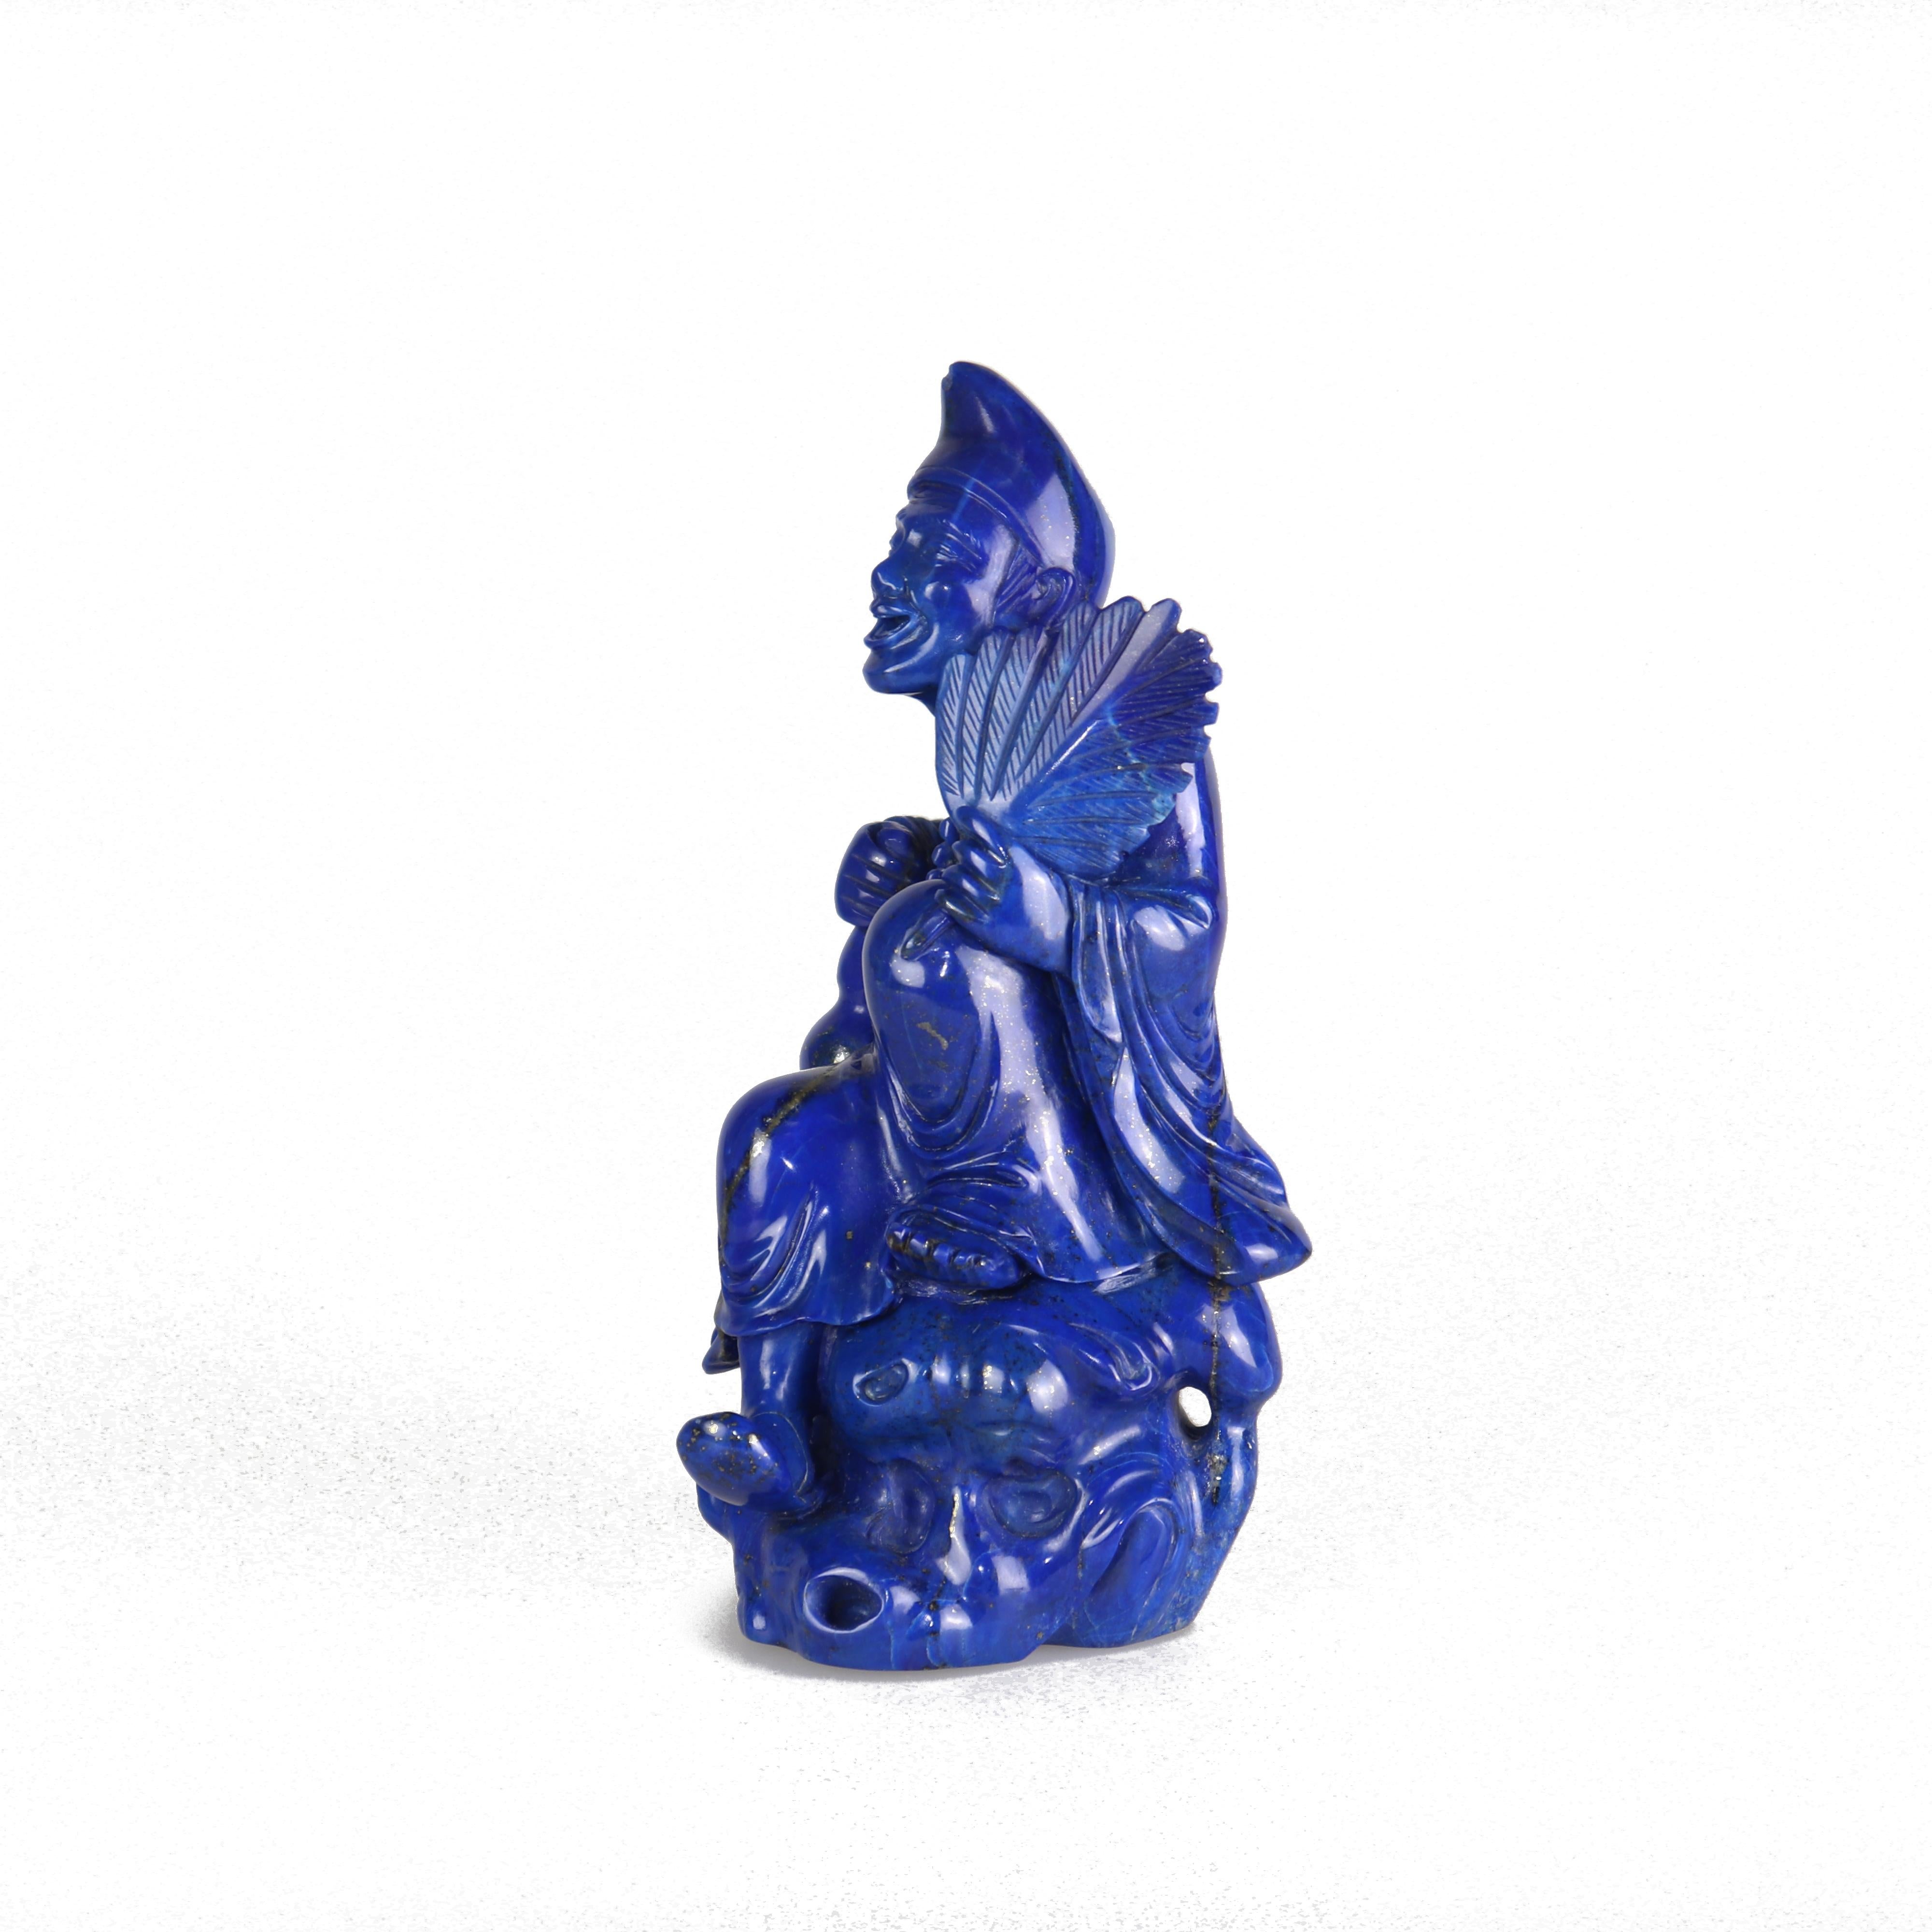 Hand-Carved Lapis Lazuli Laughing Man Carved Figure Spiritual Artisanal Statue Sculpture For Sale